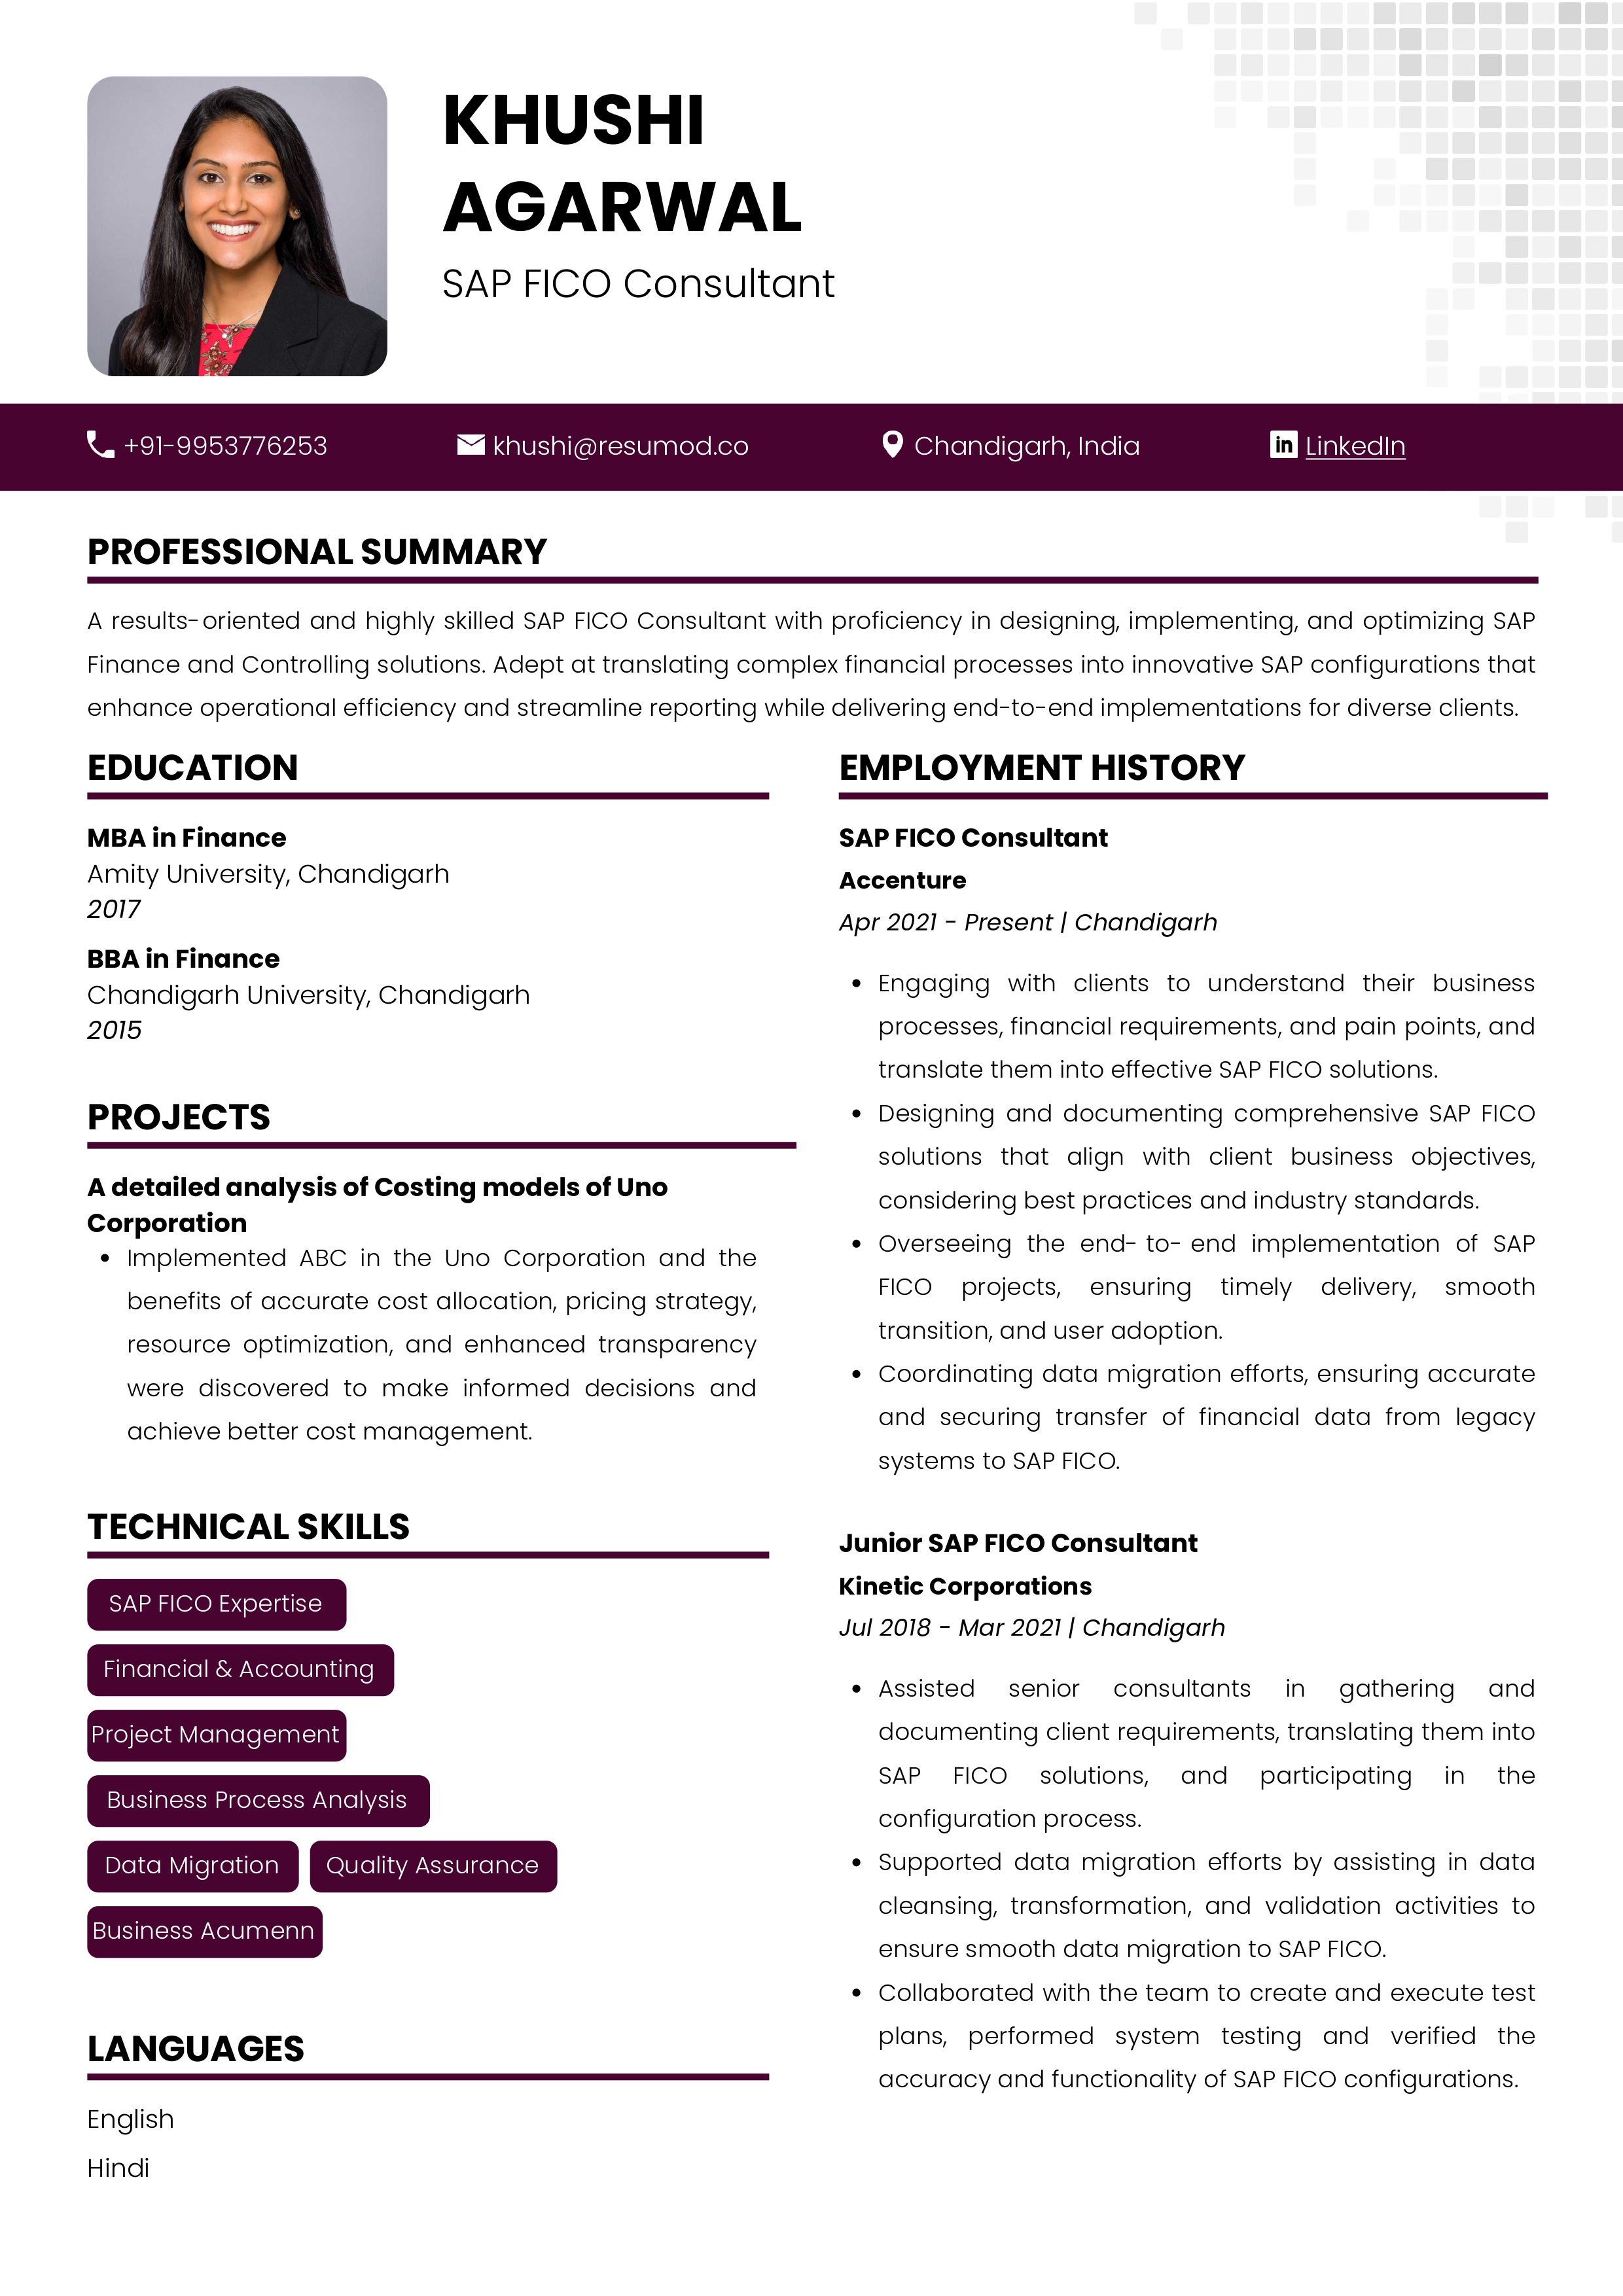 Sample Resume of SAP FICO Consultant | Free Resume Templates & Samples on Resumod.co